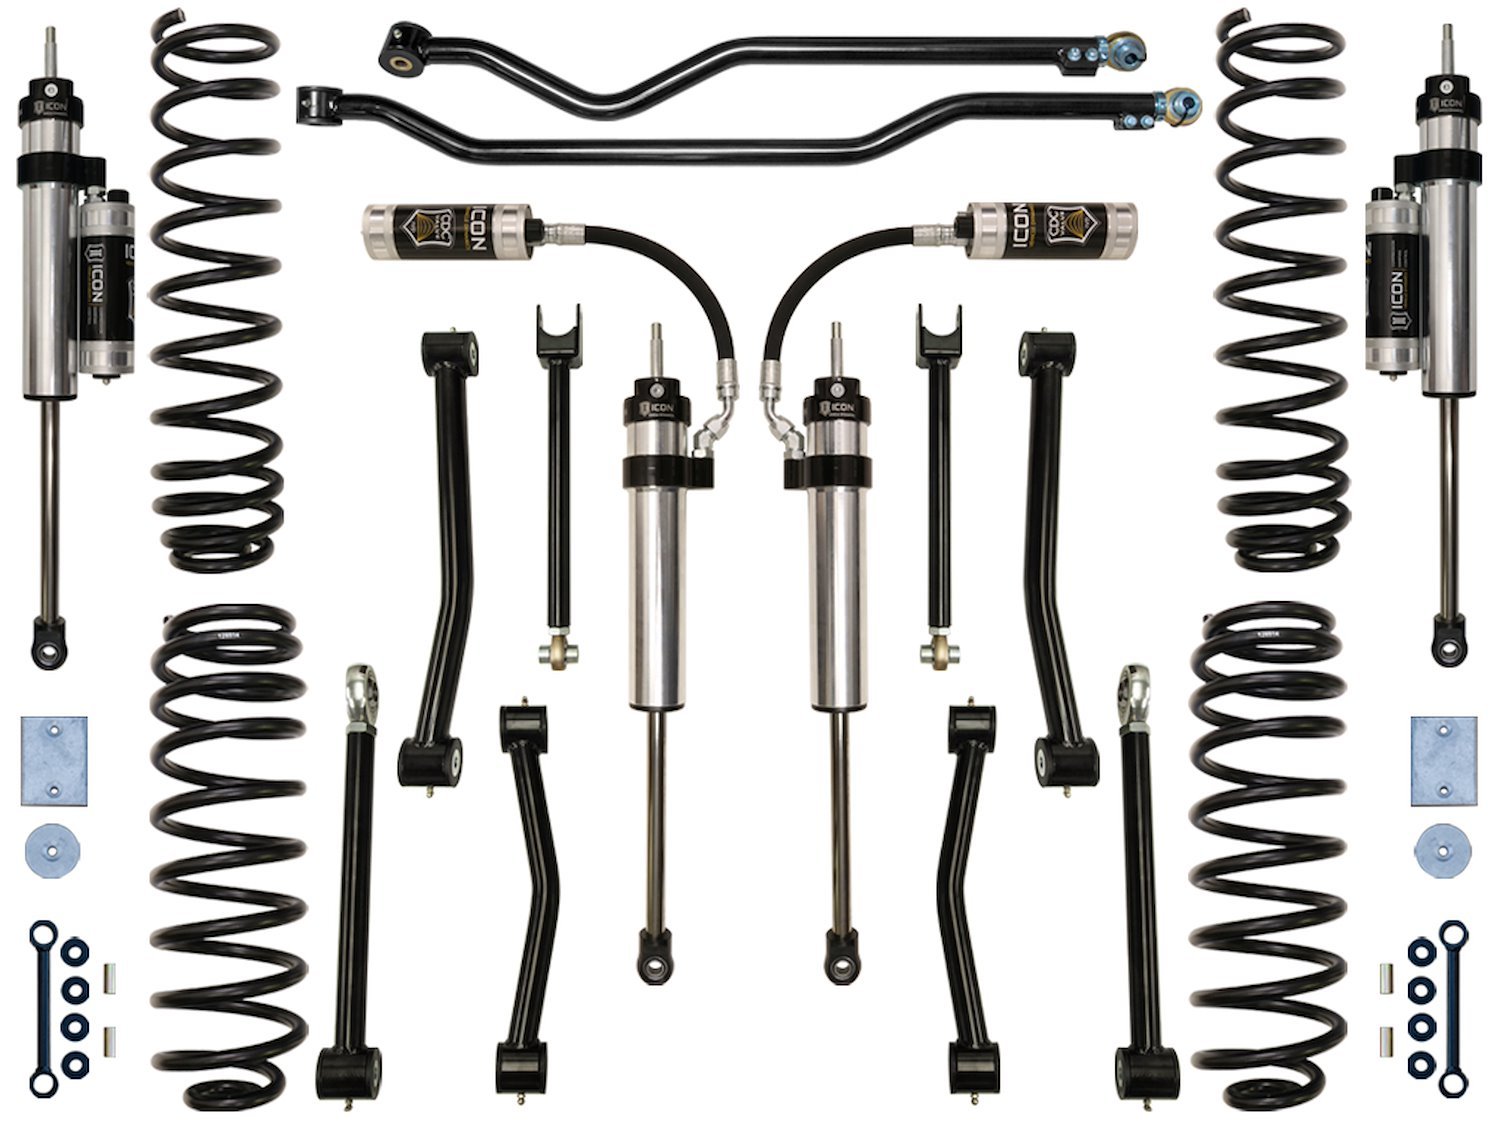 K22005 Front and Rear Suspension Lift Kit, Lift